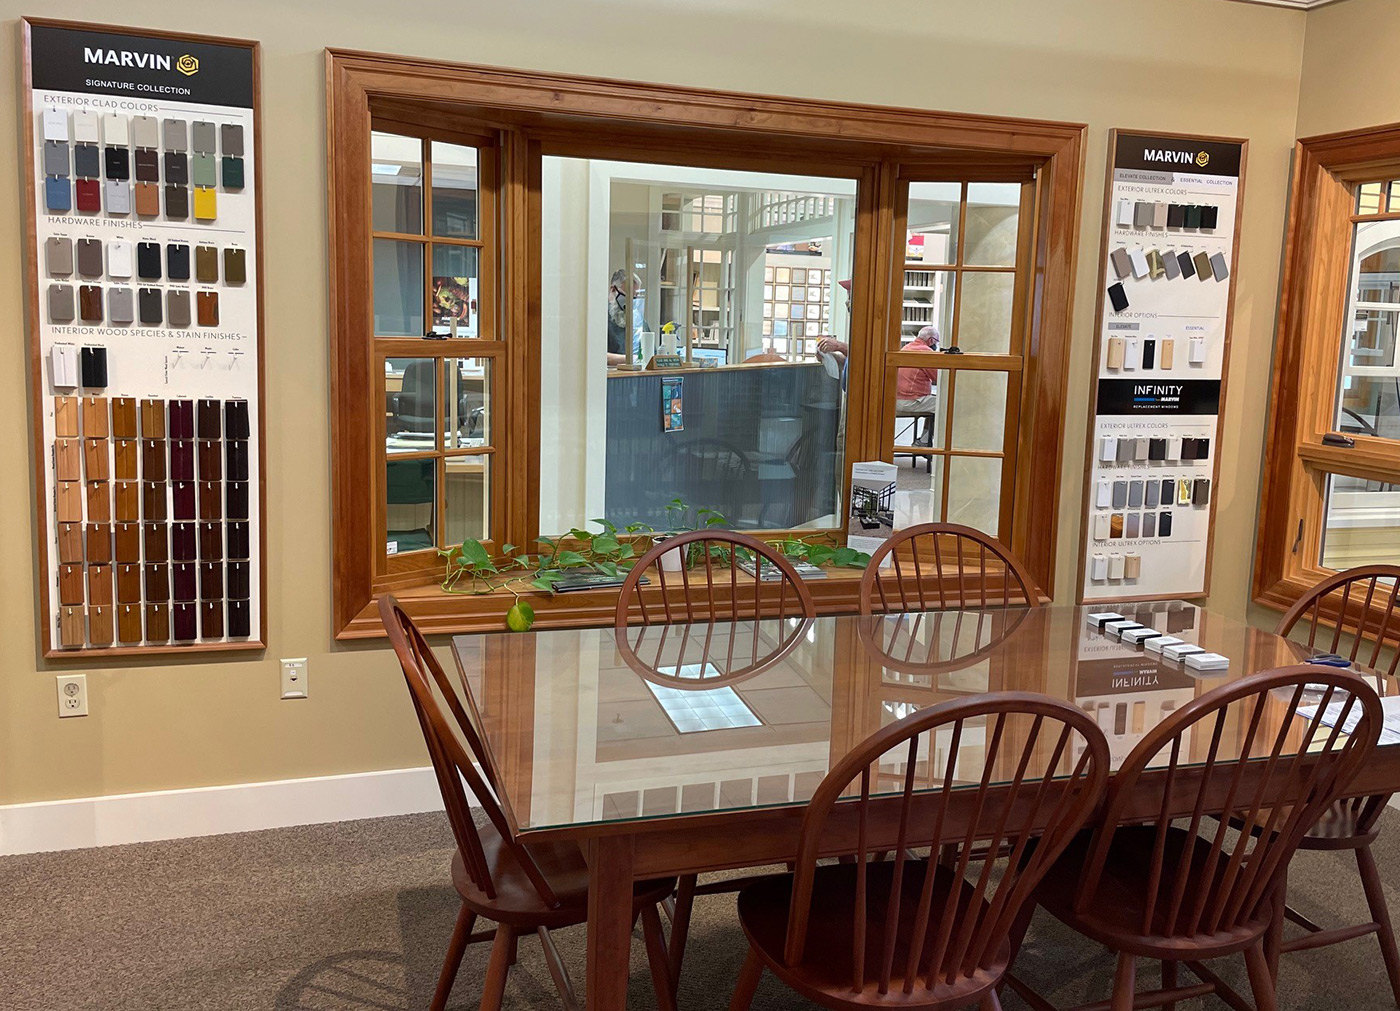 Interior of the Williston showroom with table and chairs, paint samples on wall, and windows with wood frames